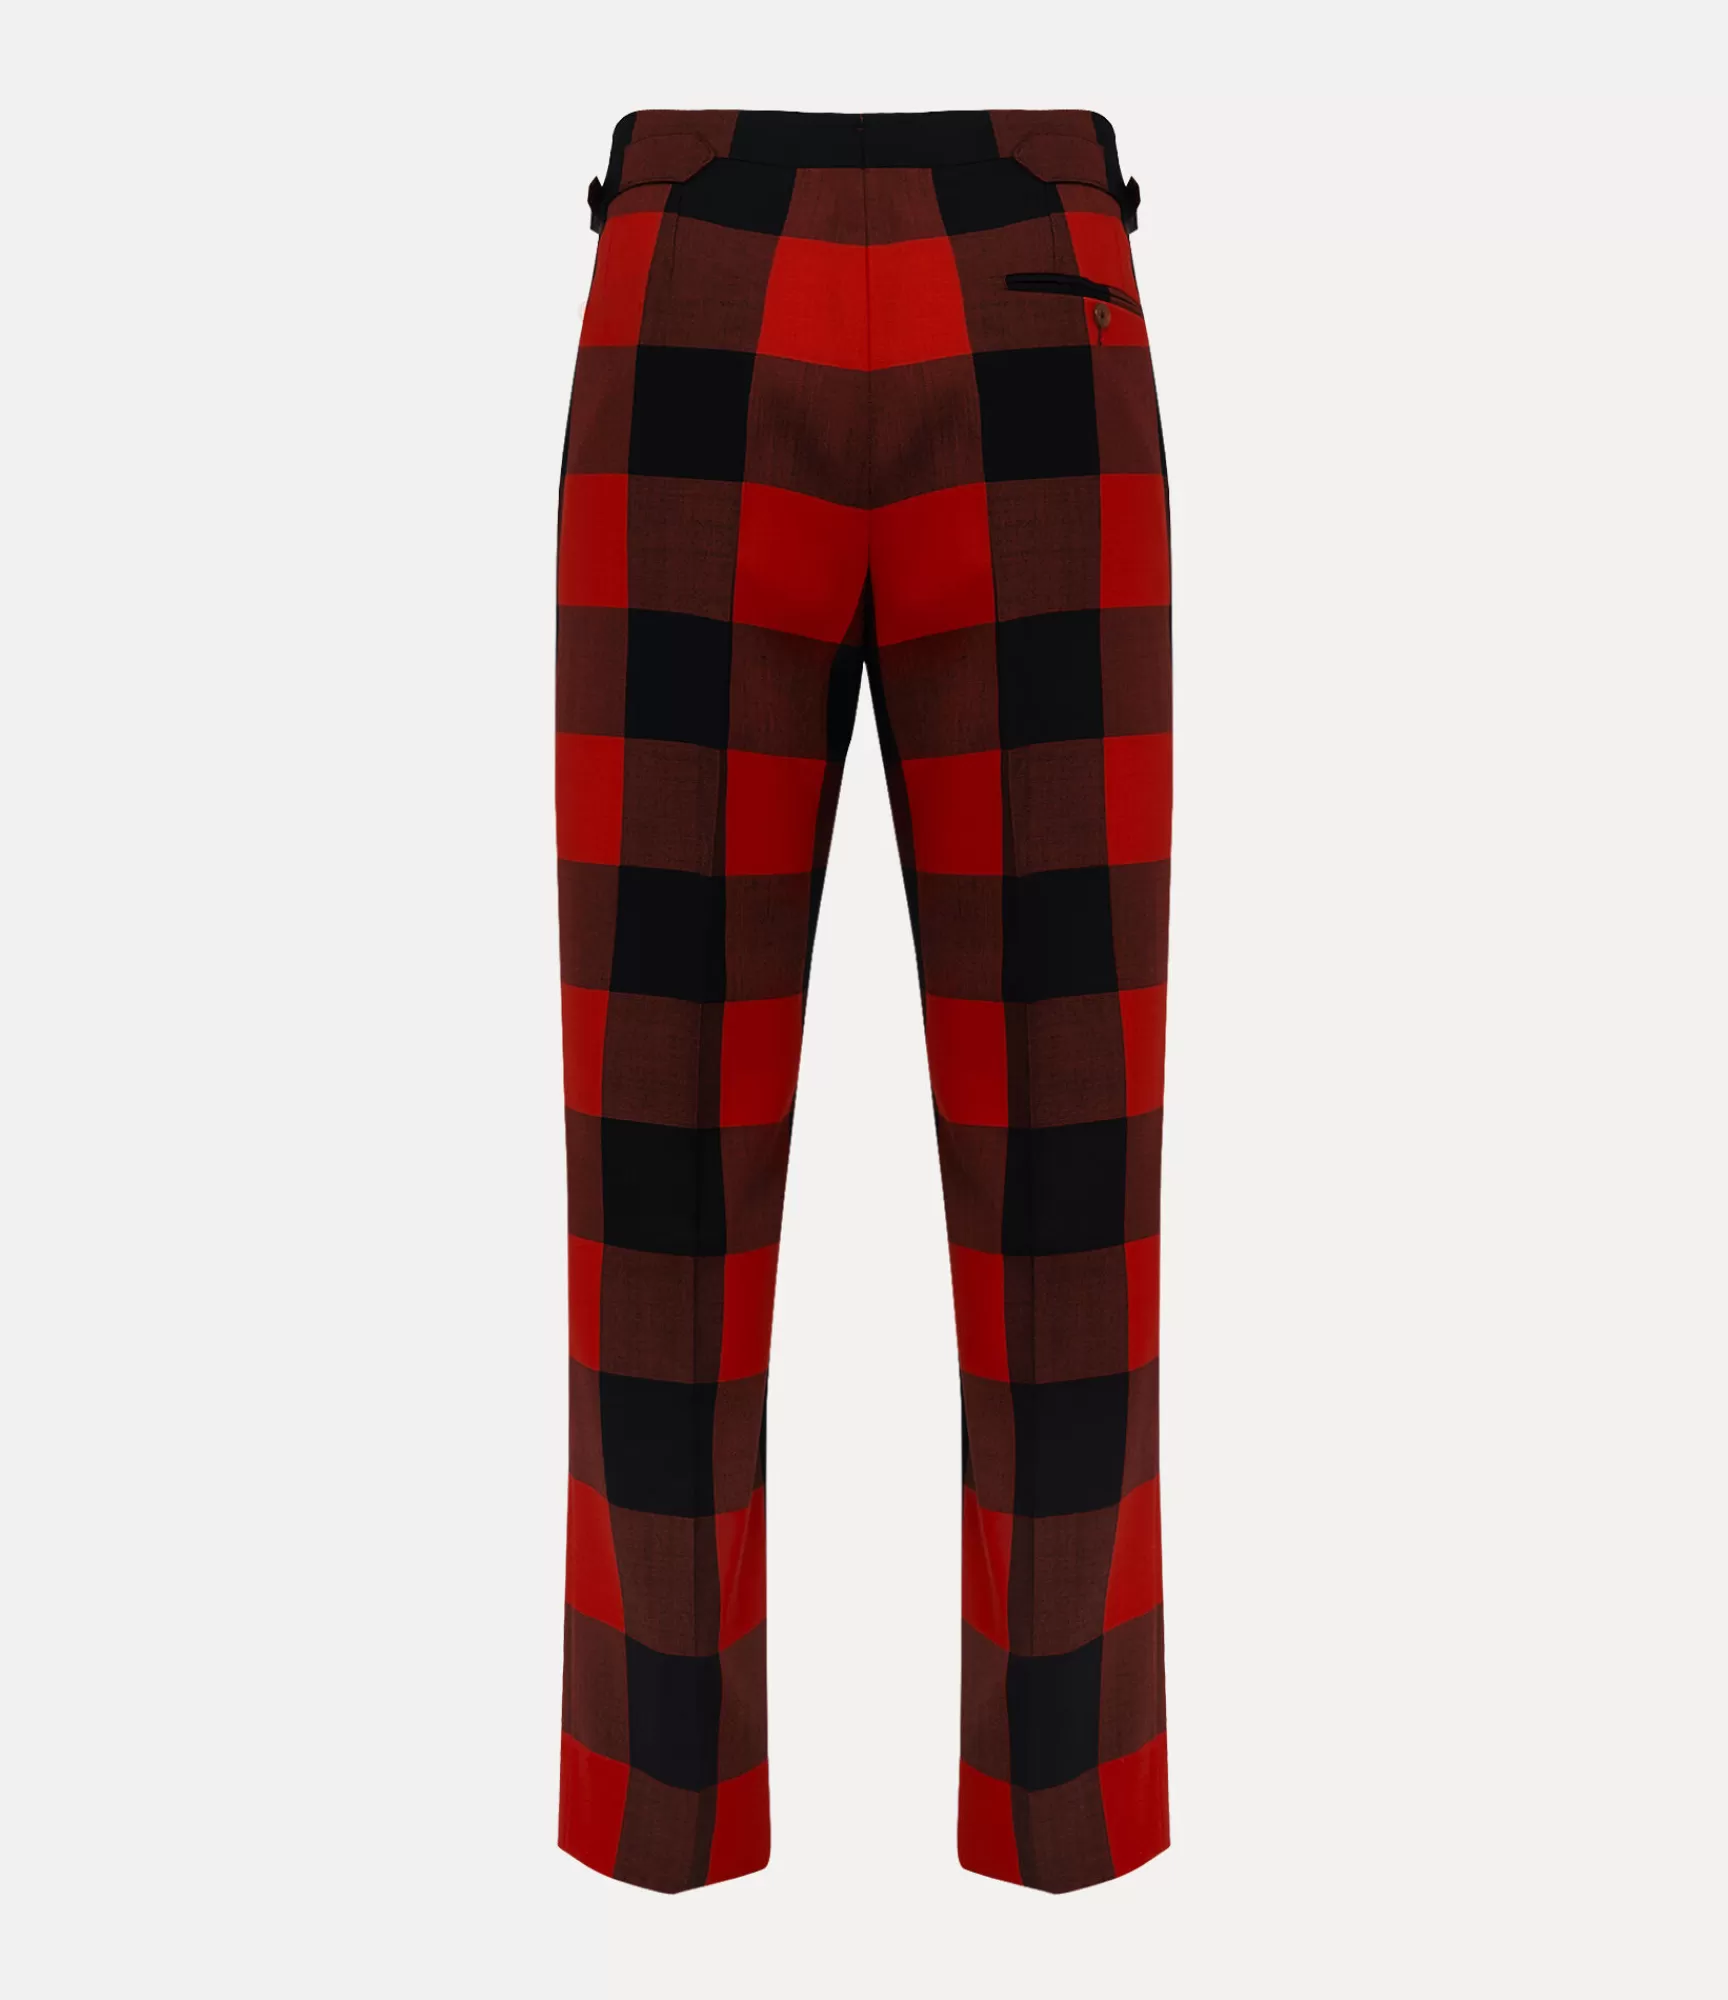 Vivienne Westwood Trousers and Shorts*Sang trousers Red/black